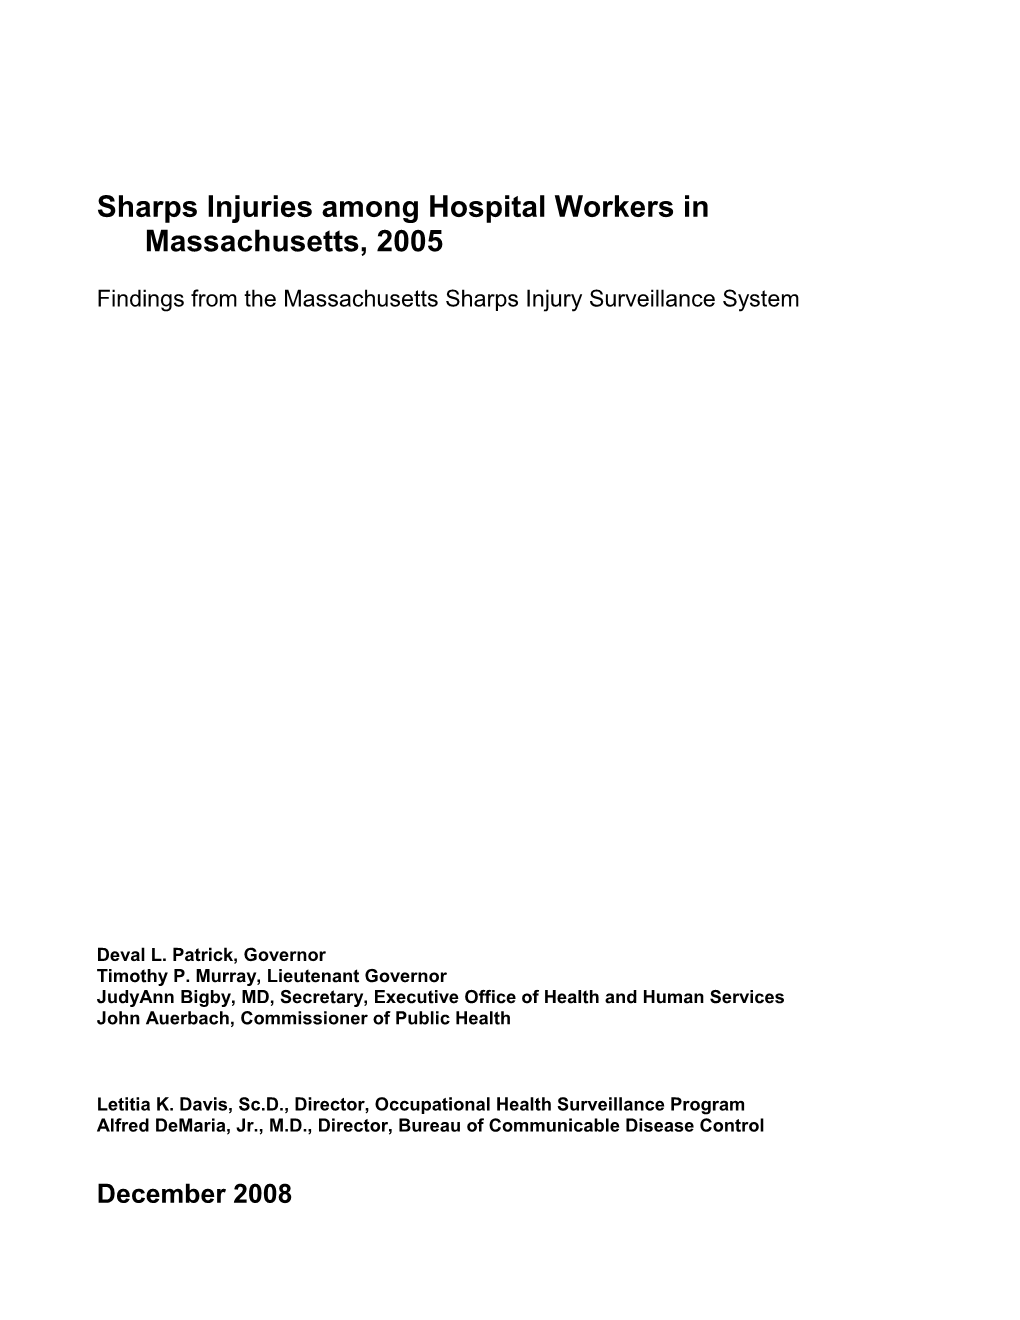 Sharps Injuries Among Hospital Workers in Massachusetts, 2005